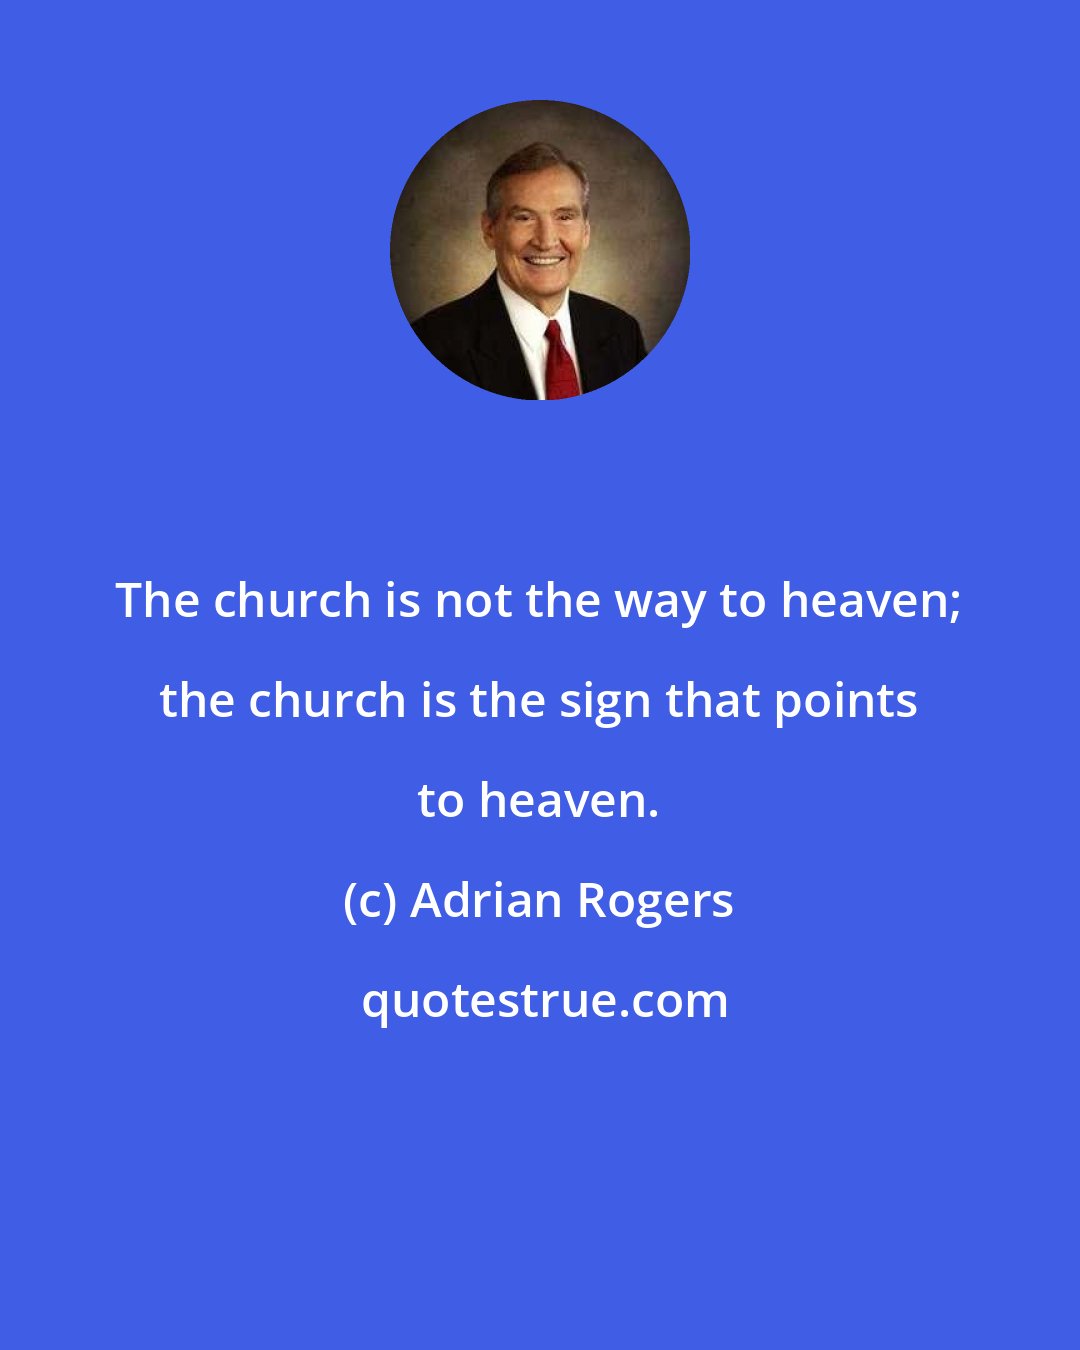 Adrian Rogers: The church is not the way to heaven; the church is the sign that points to heaven.